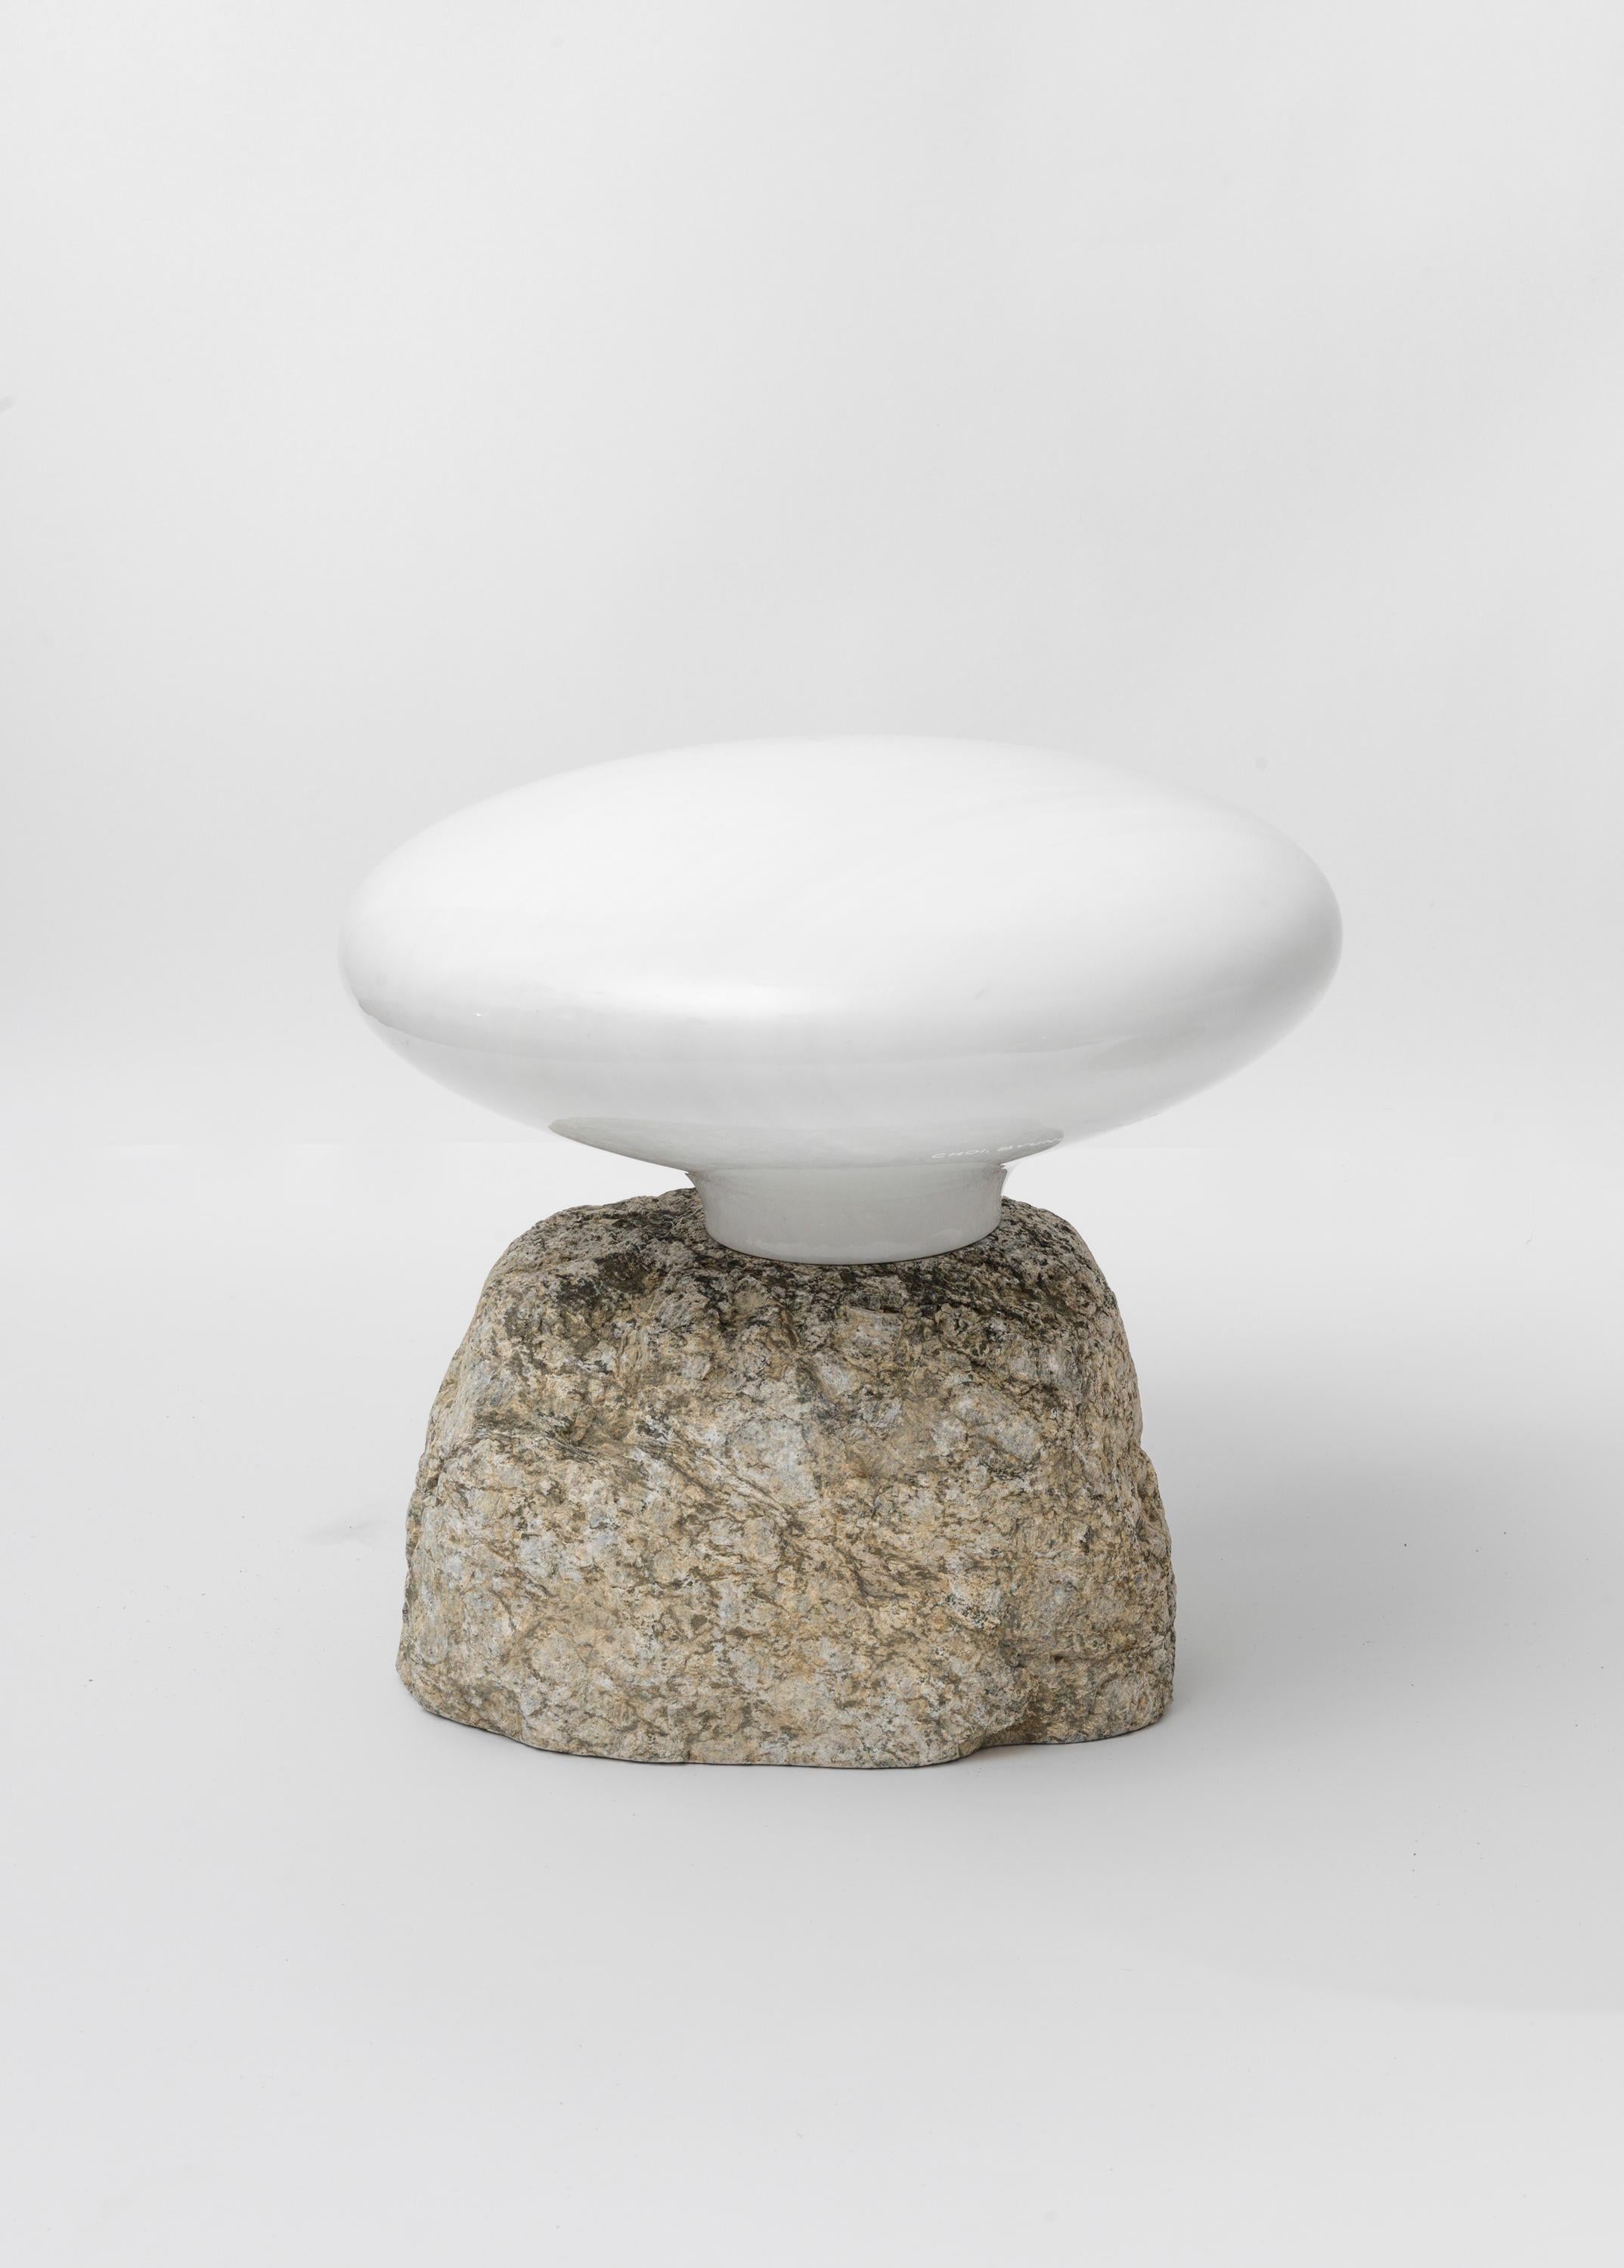 beyond the image 014-16, 2014
White marble, natural stone
18.9 x 19.69 x 19.69 inches
48 x 50 x 50 cm

Byung Hoon Choi was born in Gangwon-do, Korea in 1952. In 1974, he graduated from the Hong-ik University with a degree in Applied Fine Arts. He